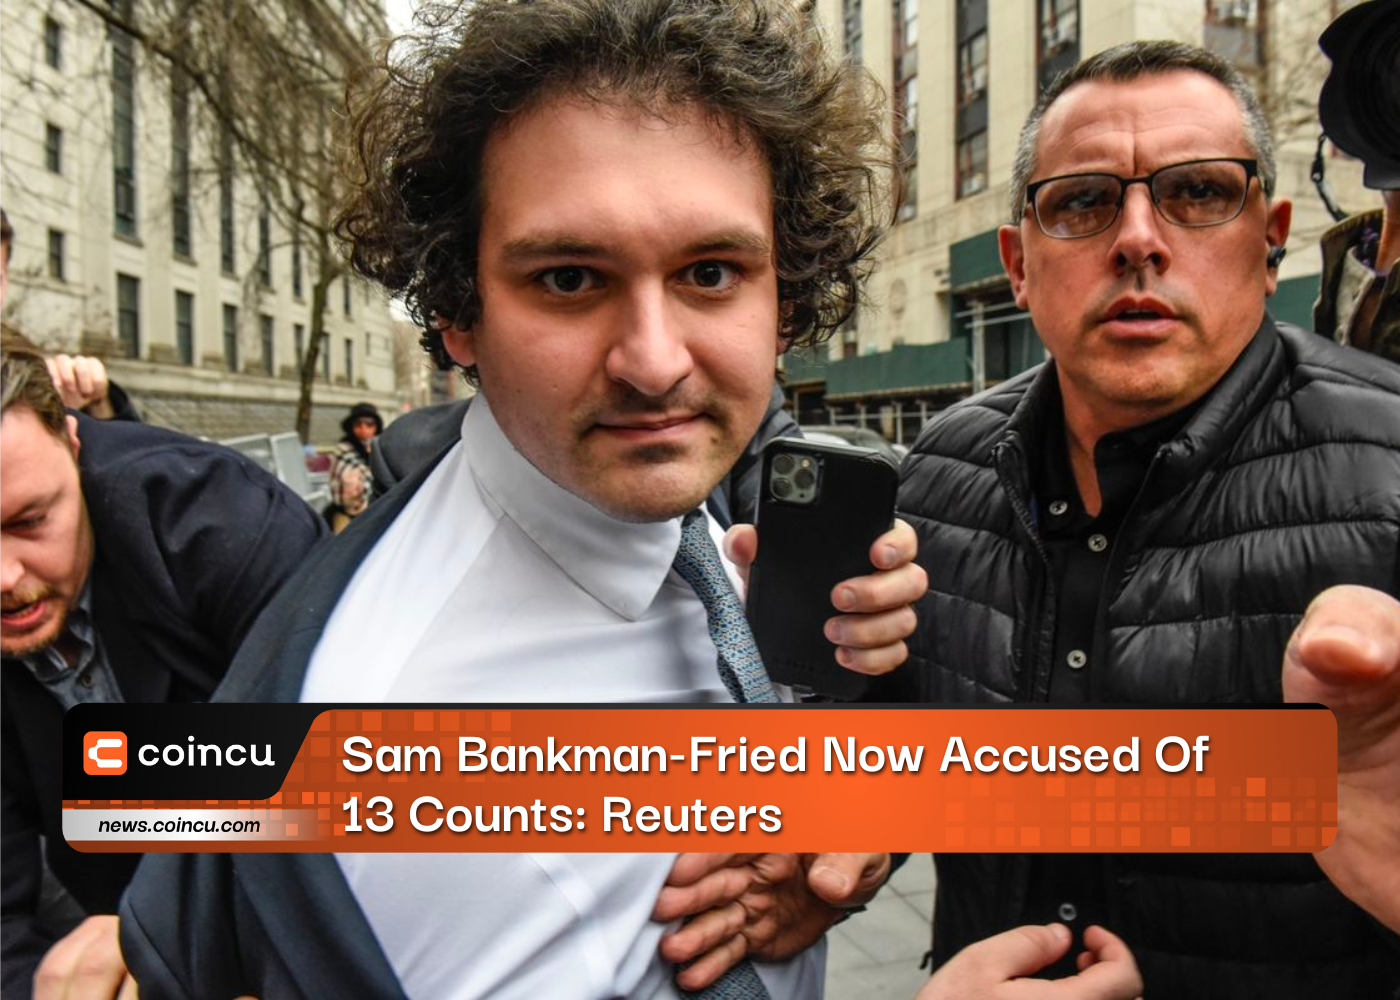 Sam Bankman-Fried Now Accused Of 13 Counts: Reuters